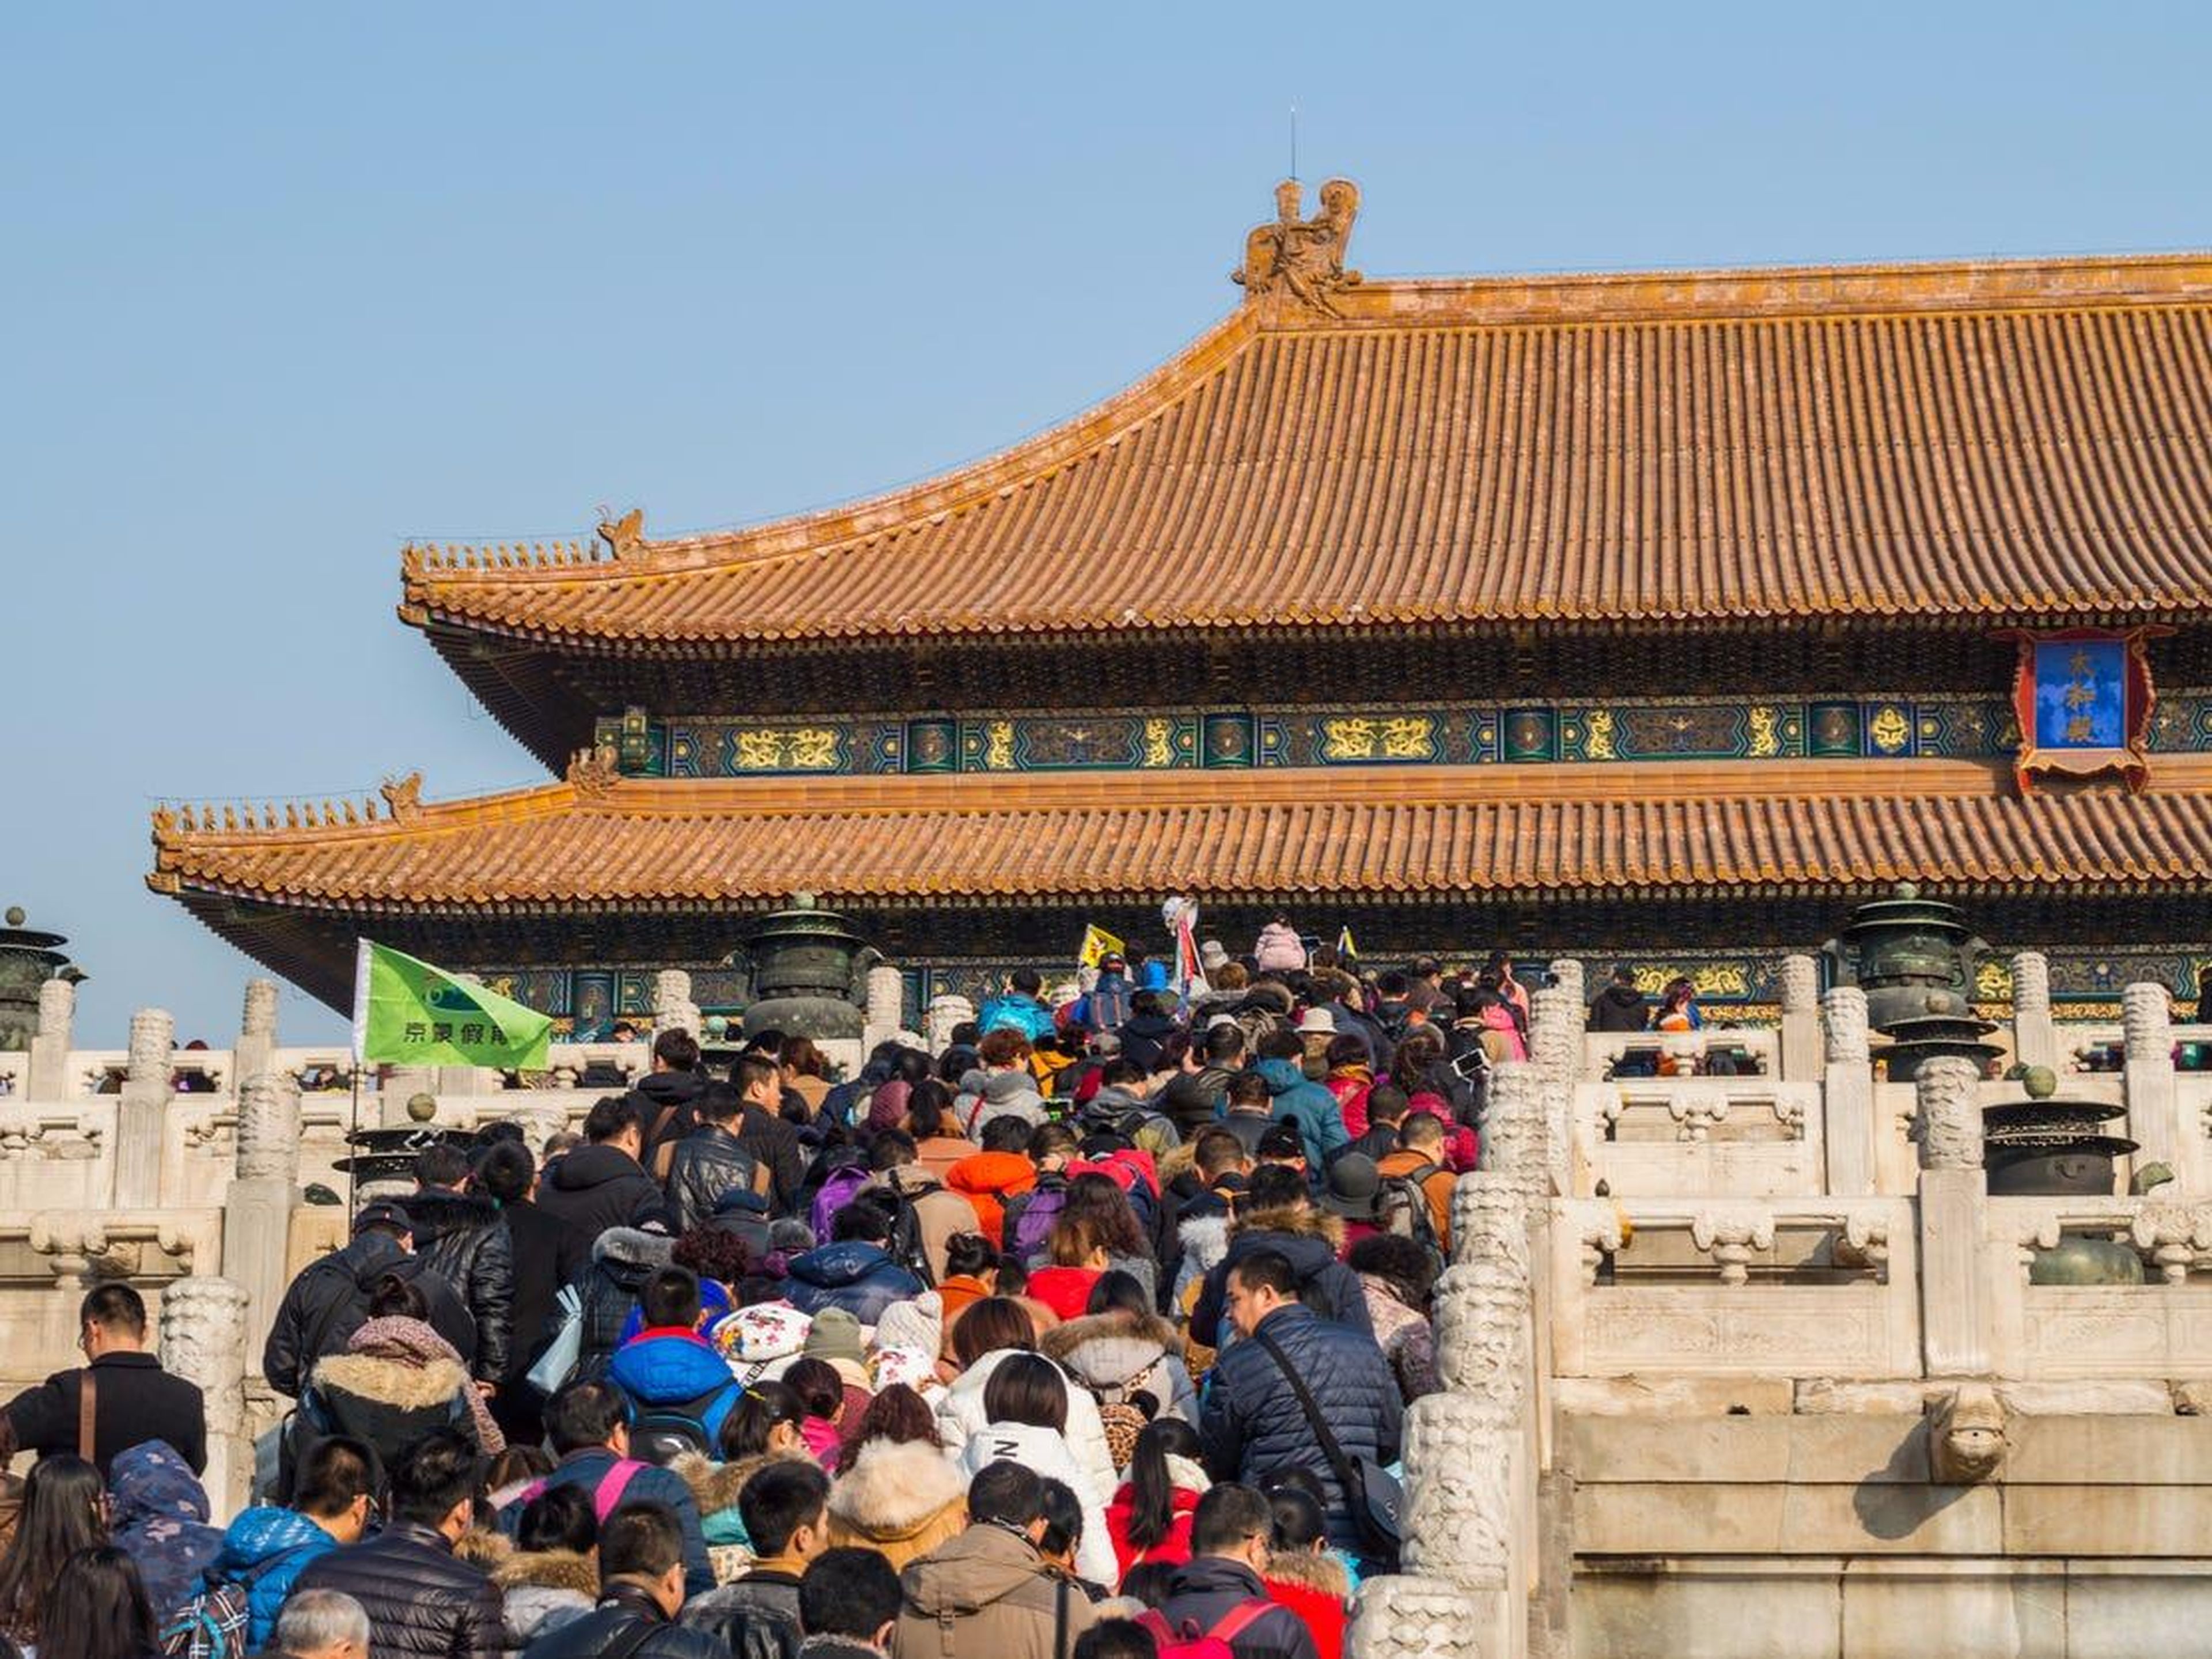 BEFORE: The Forbidden City, a palace complex in Beijing, is one of China's most visited attractions.